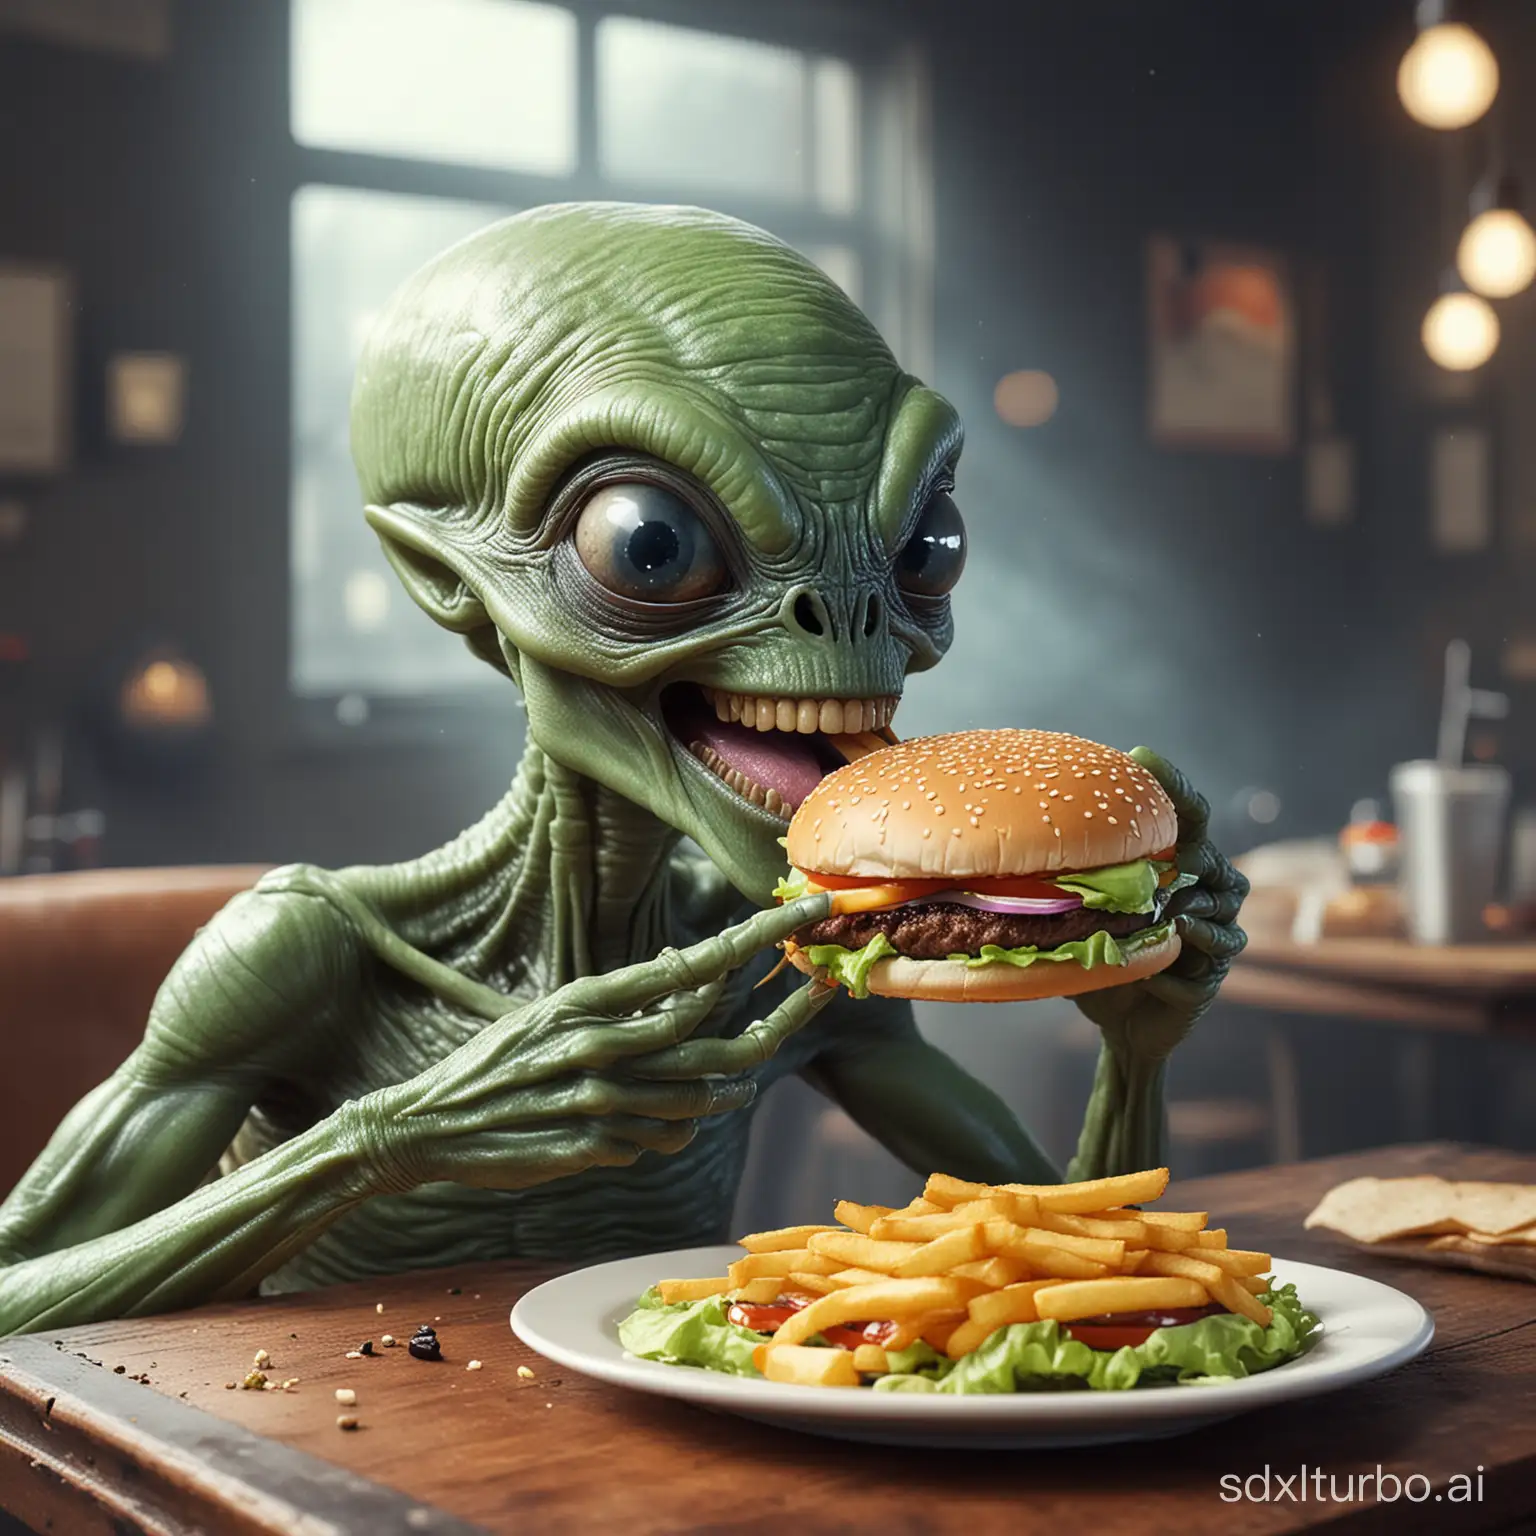 An alien is happily eating a burger